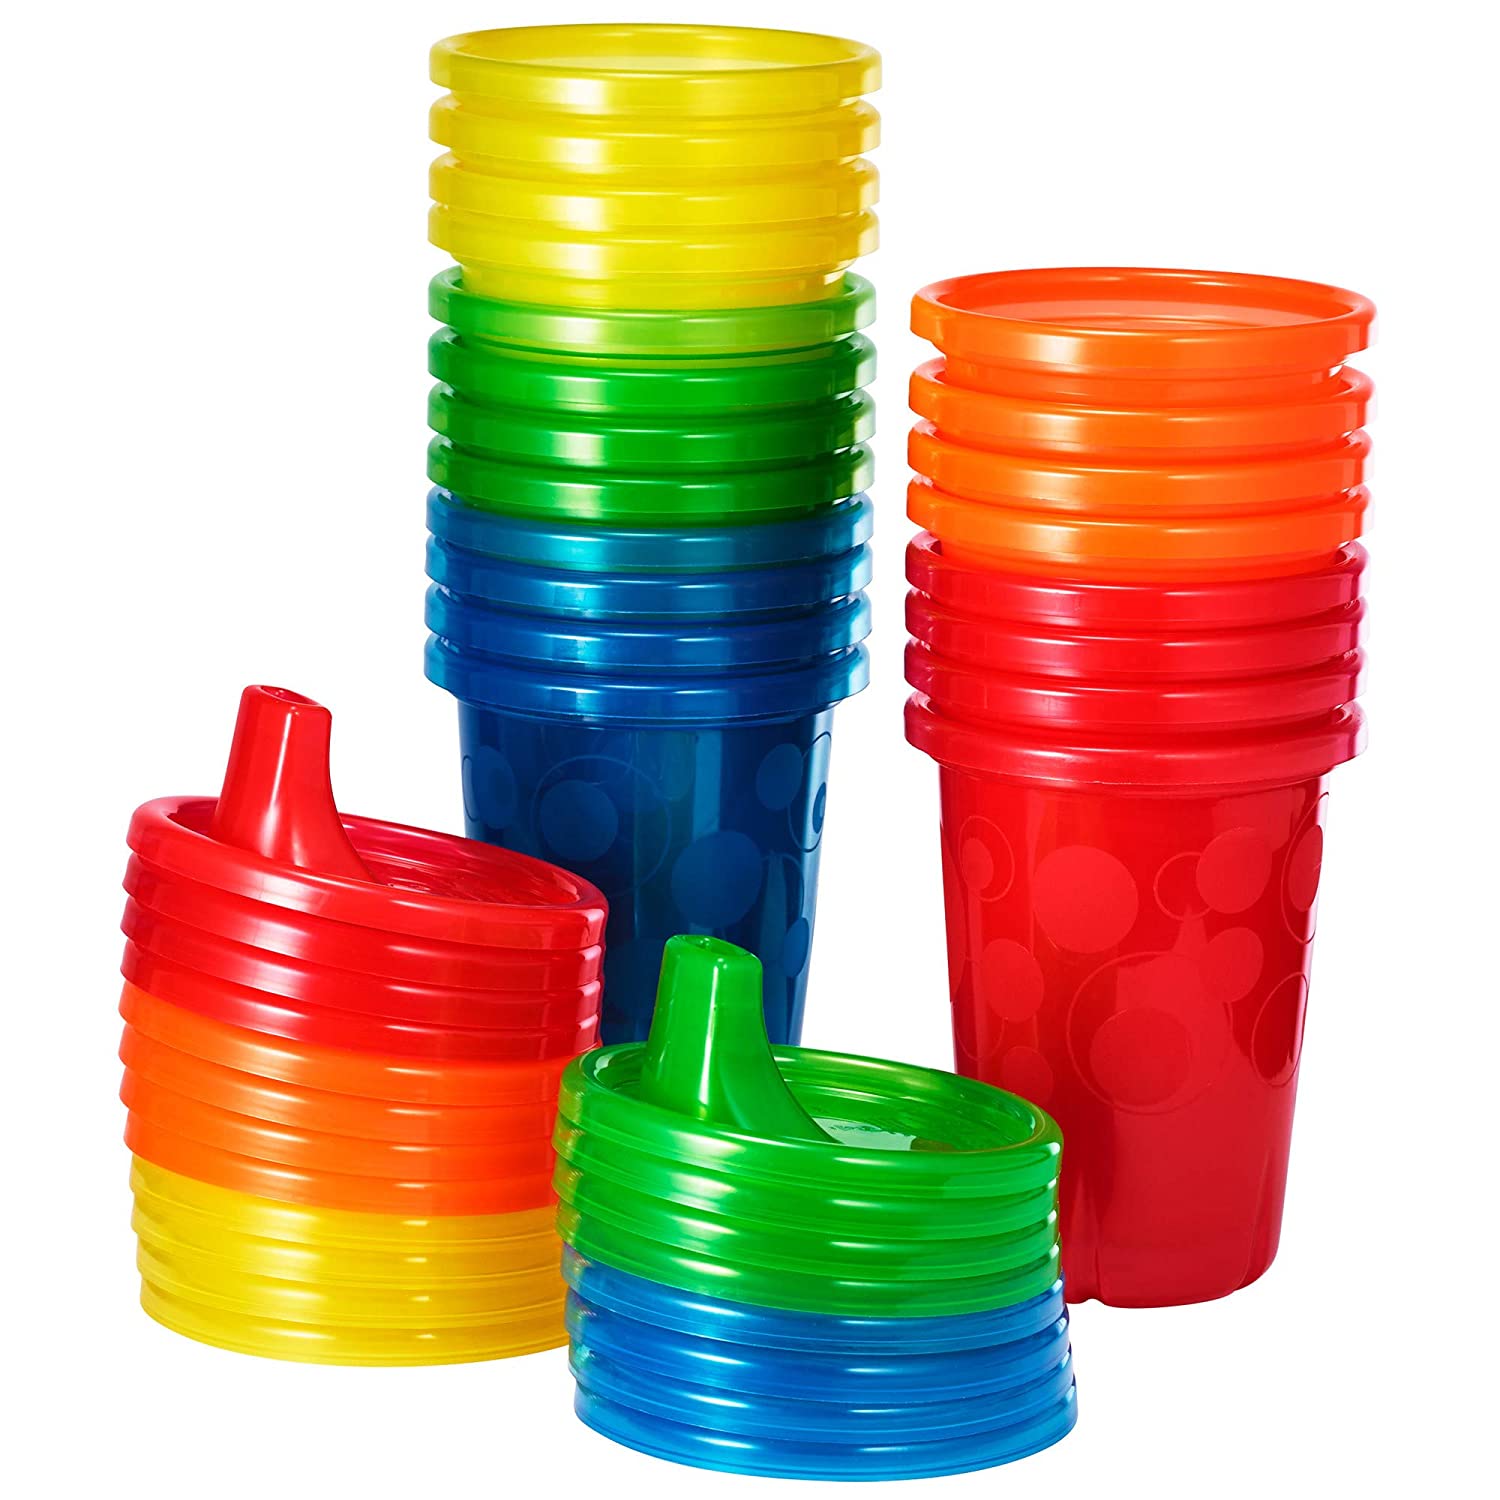 https://cdn.shopify.com/s/files/1/1300/6865/products/The-First-Years-Take-Toss-10oz-Sippy-Cup-20-Pack-9m-THE-FIRST-YEARS.jpg?v=1656639029&width=1500